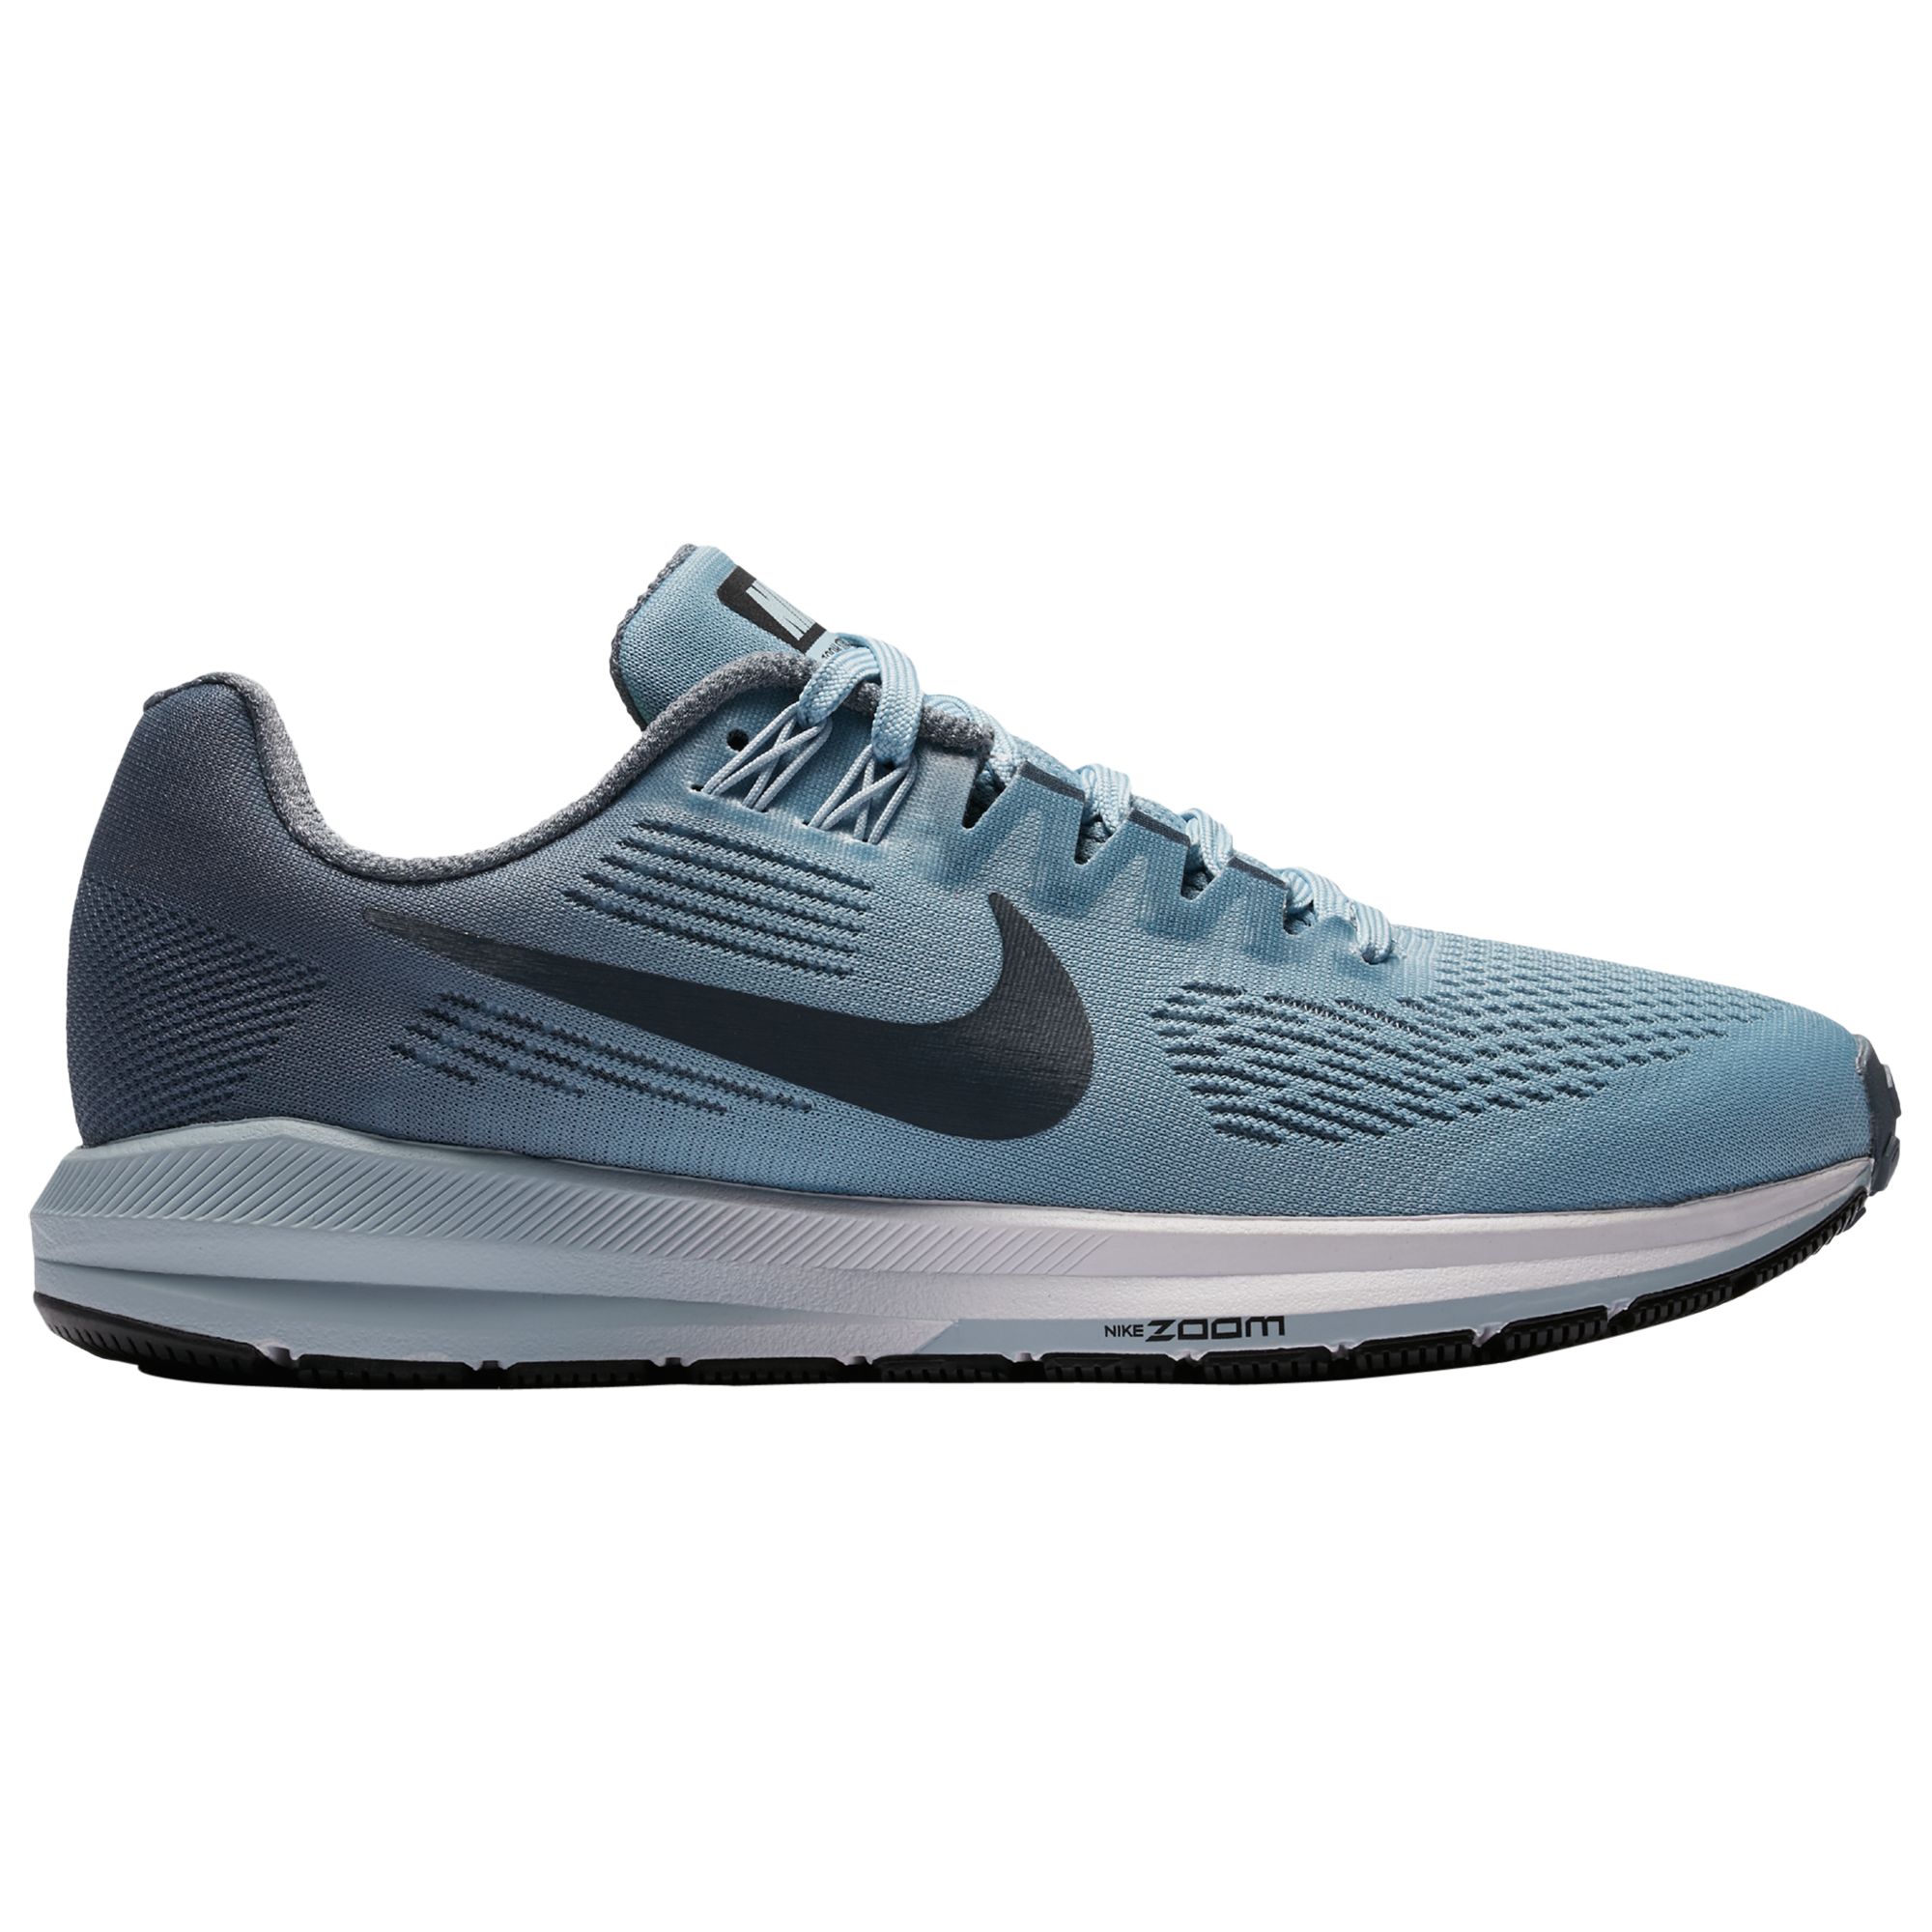 nike zoom structure 21 women's